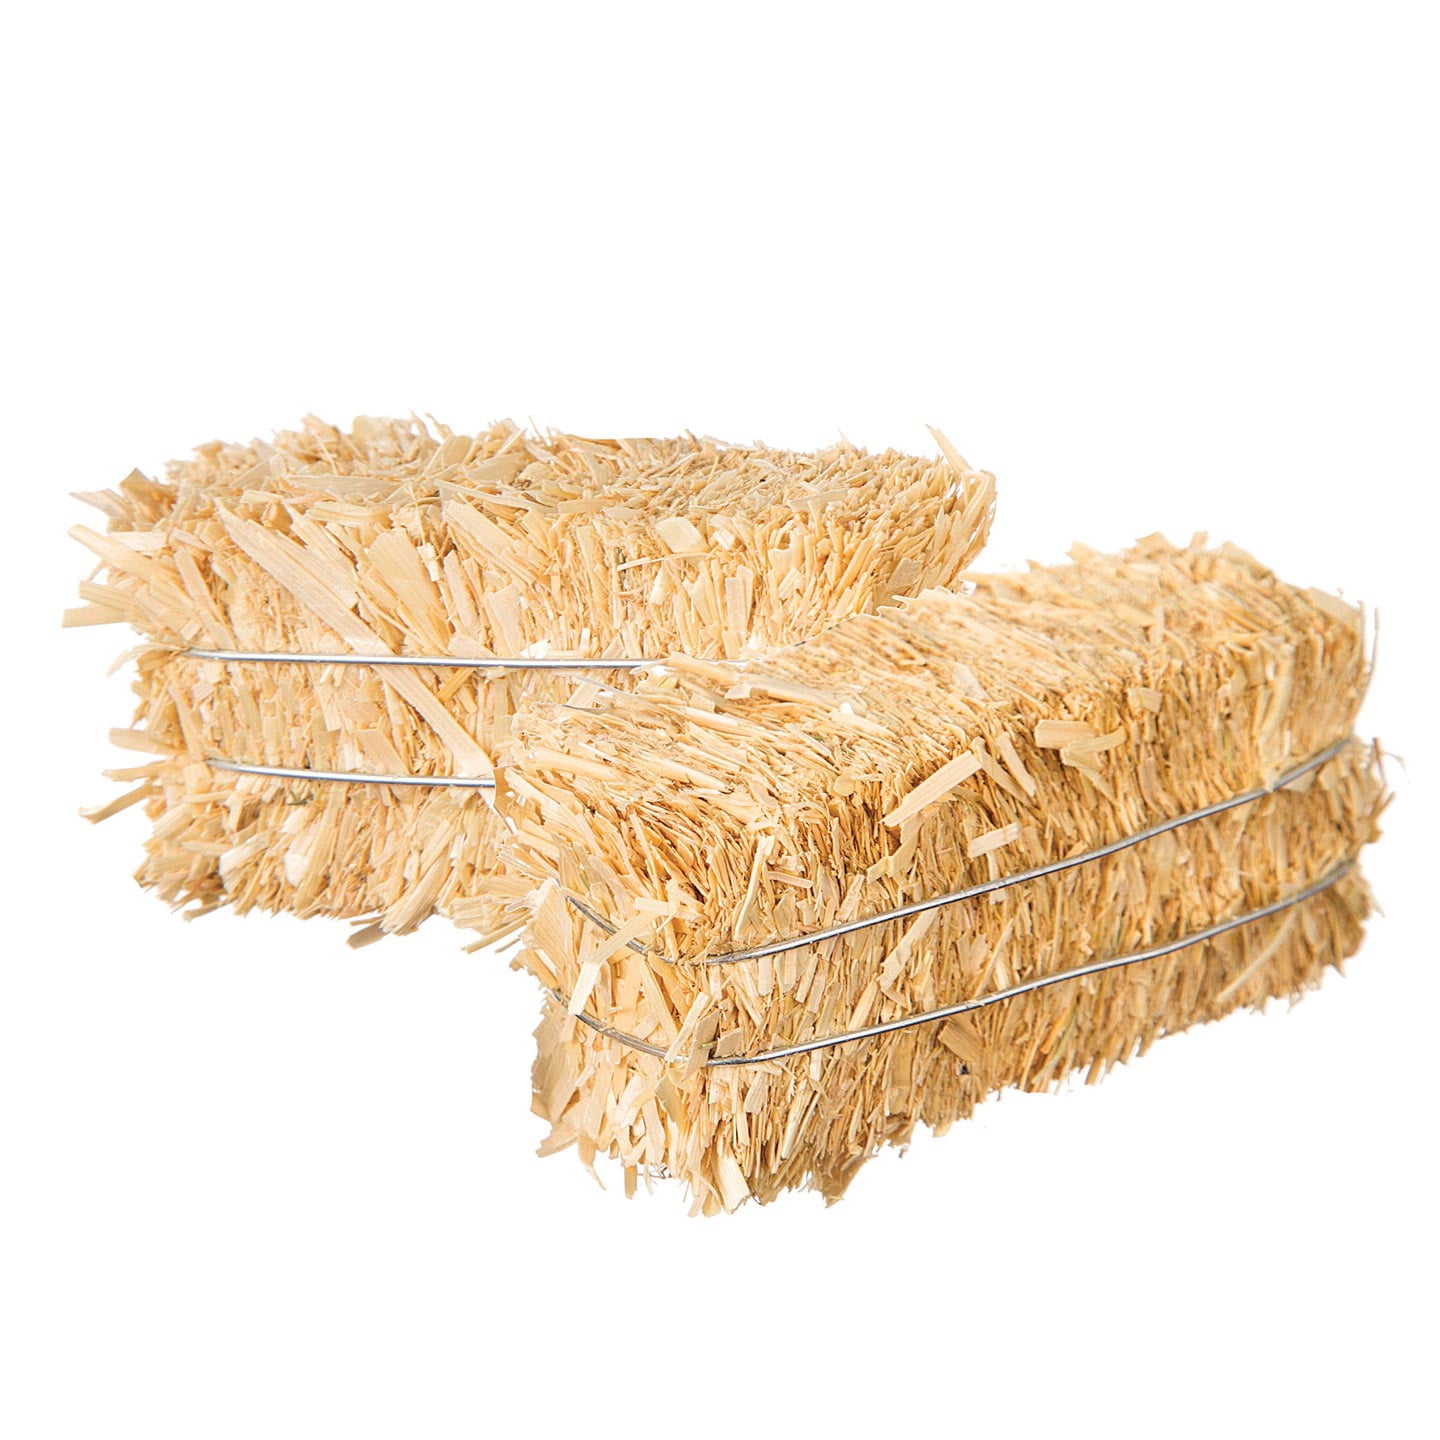 Darice FloraCraft Straw Weavers Micro Bale 2 pie 2.5 x 1.25 inches Natural